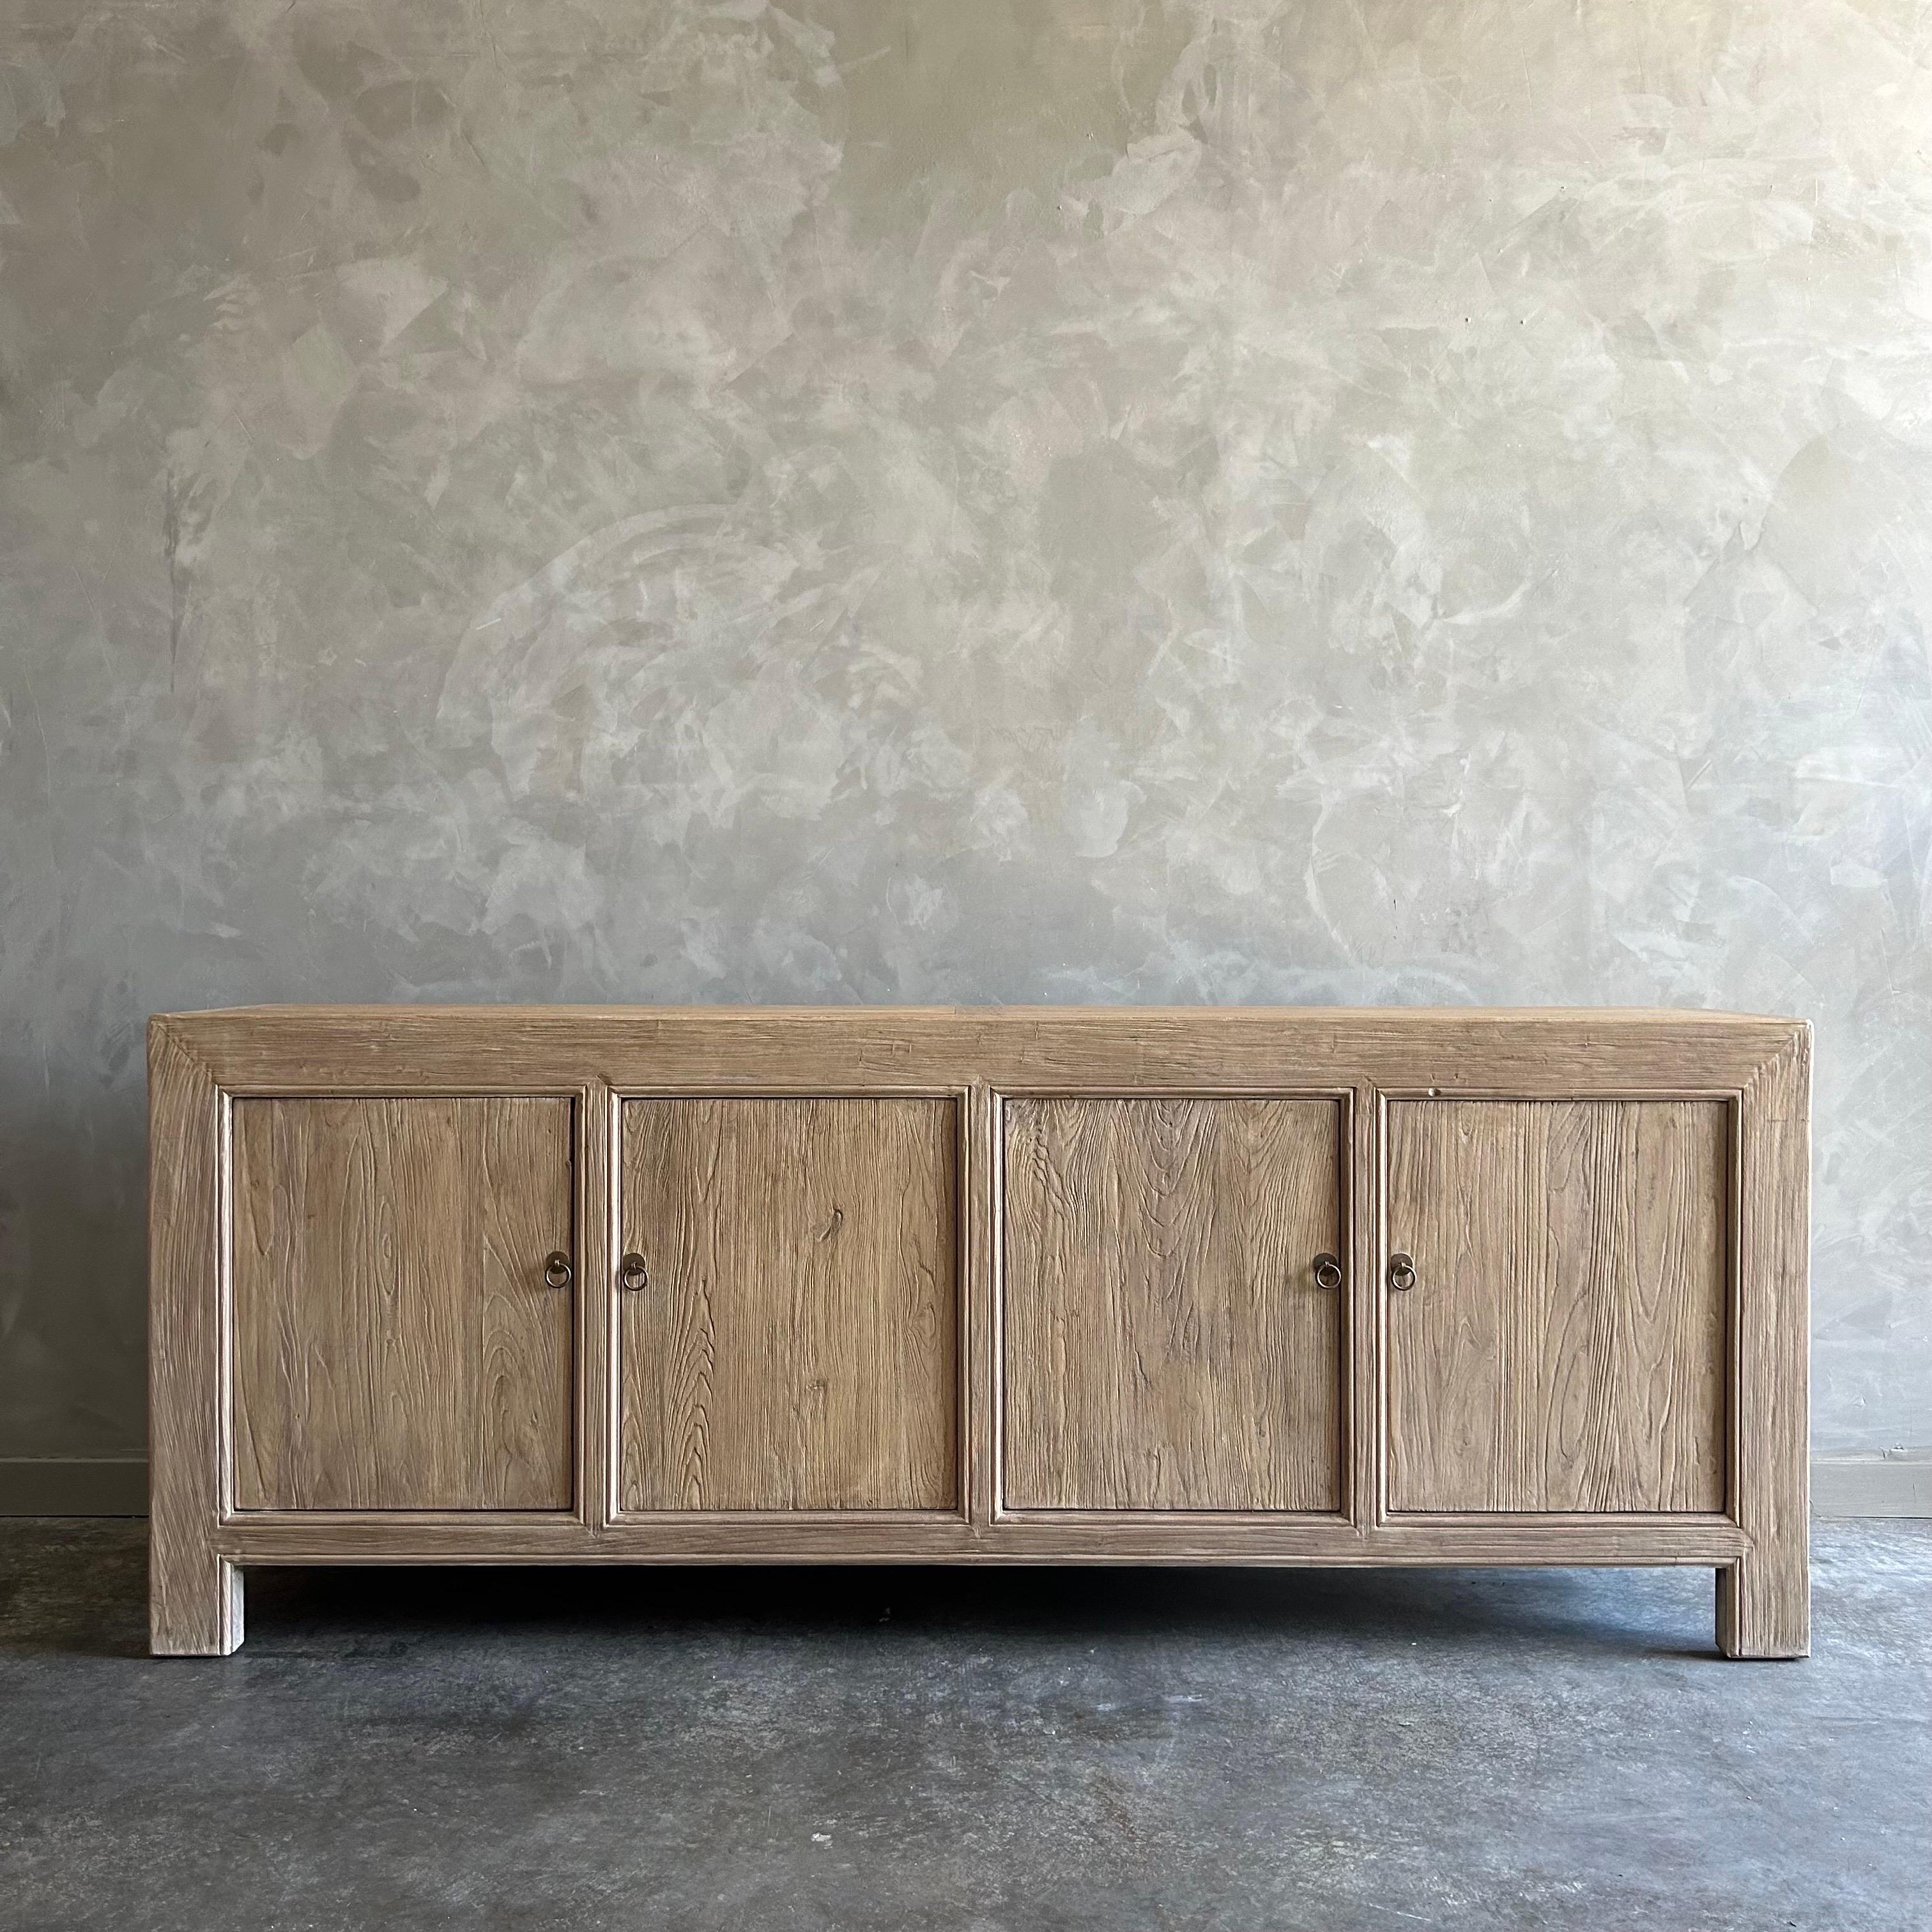 Reclaimed elm wood 4 door cabinet. 
These old elm timbers show in its most primal, natural form. The artisanal construction methods highlight the elm woods beautiful grain pattern & knots and fissures from its past life. The most authentic materials